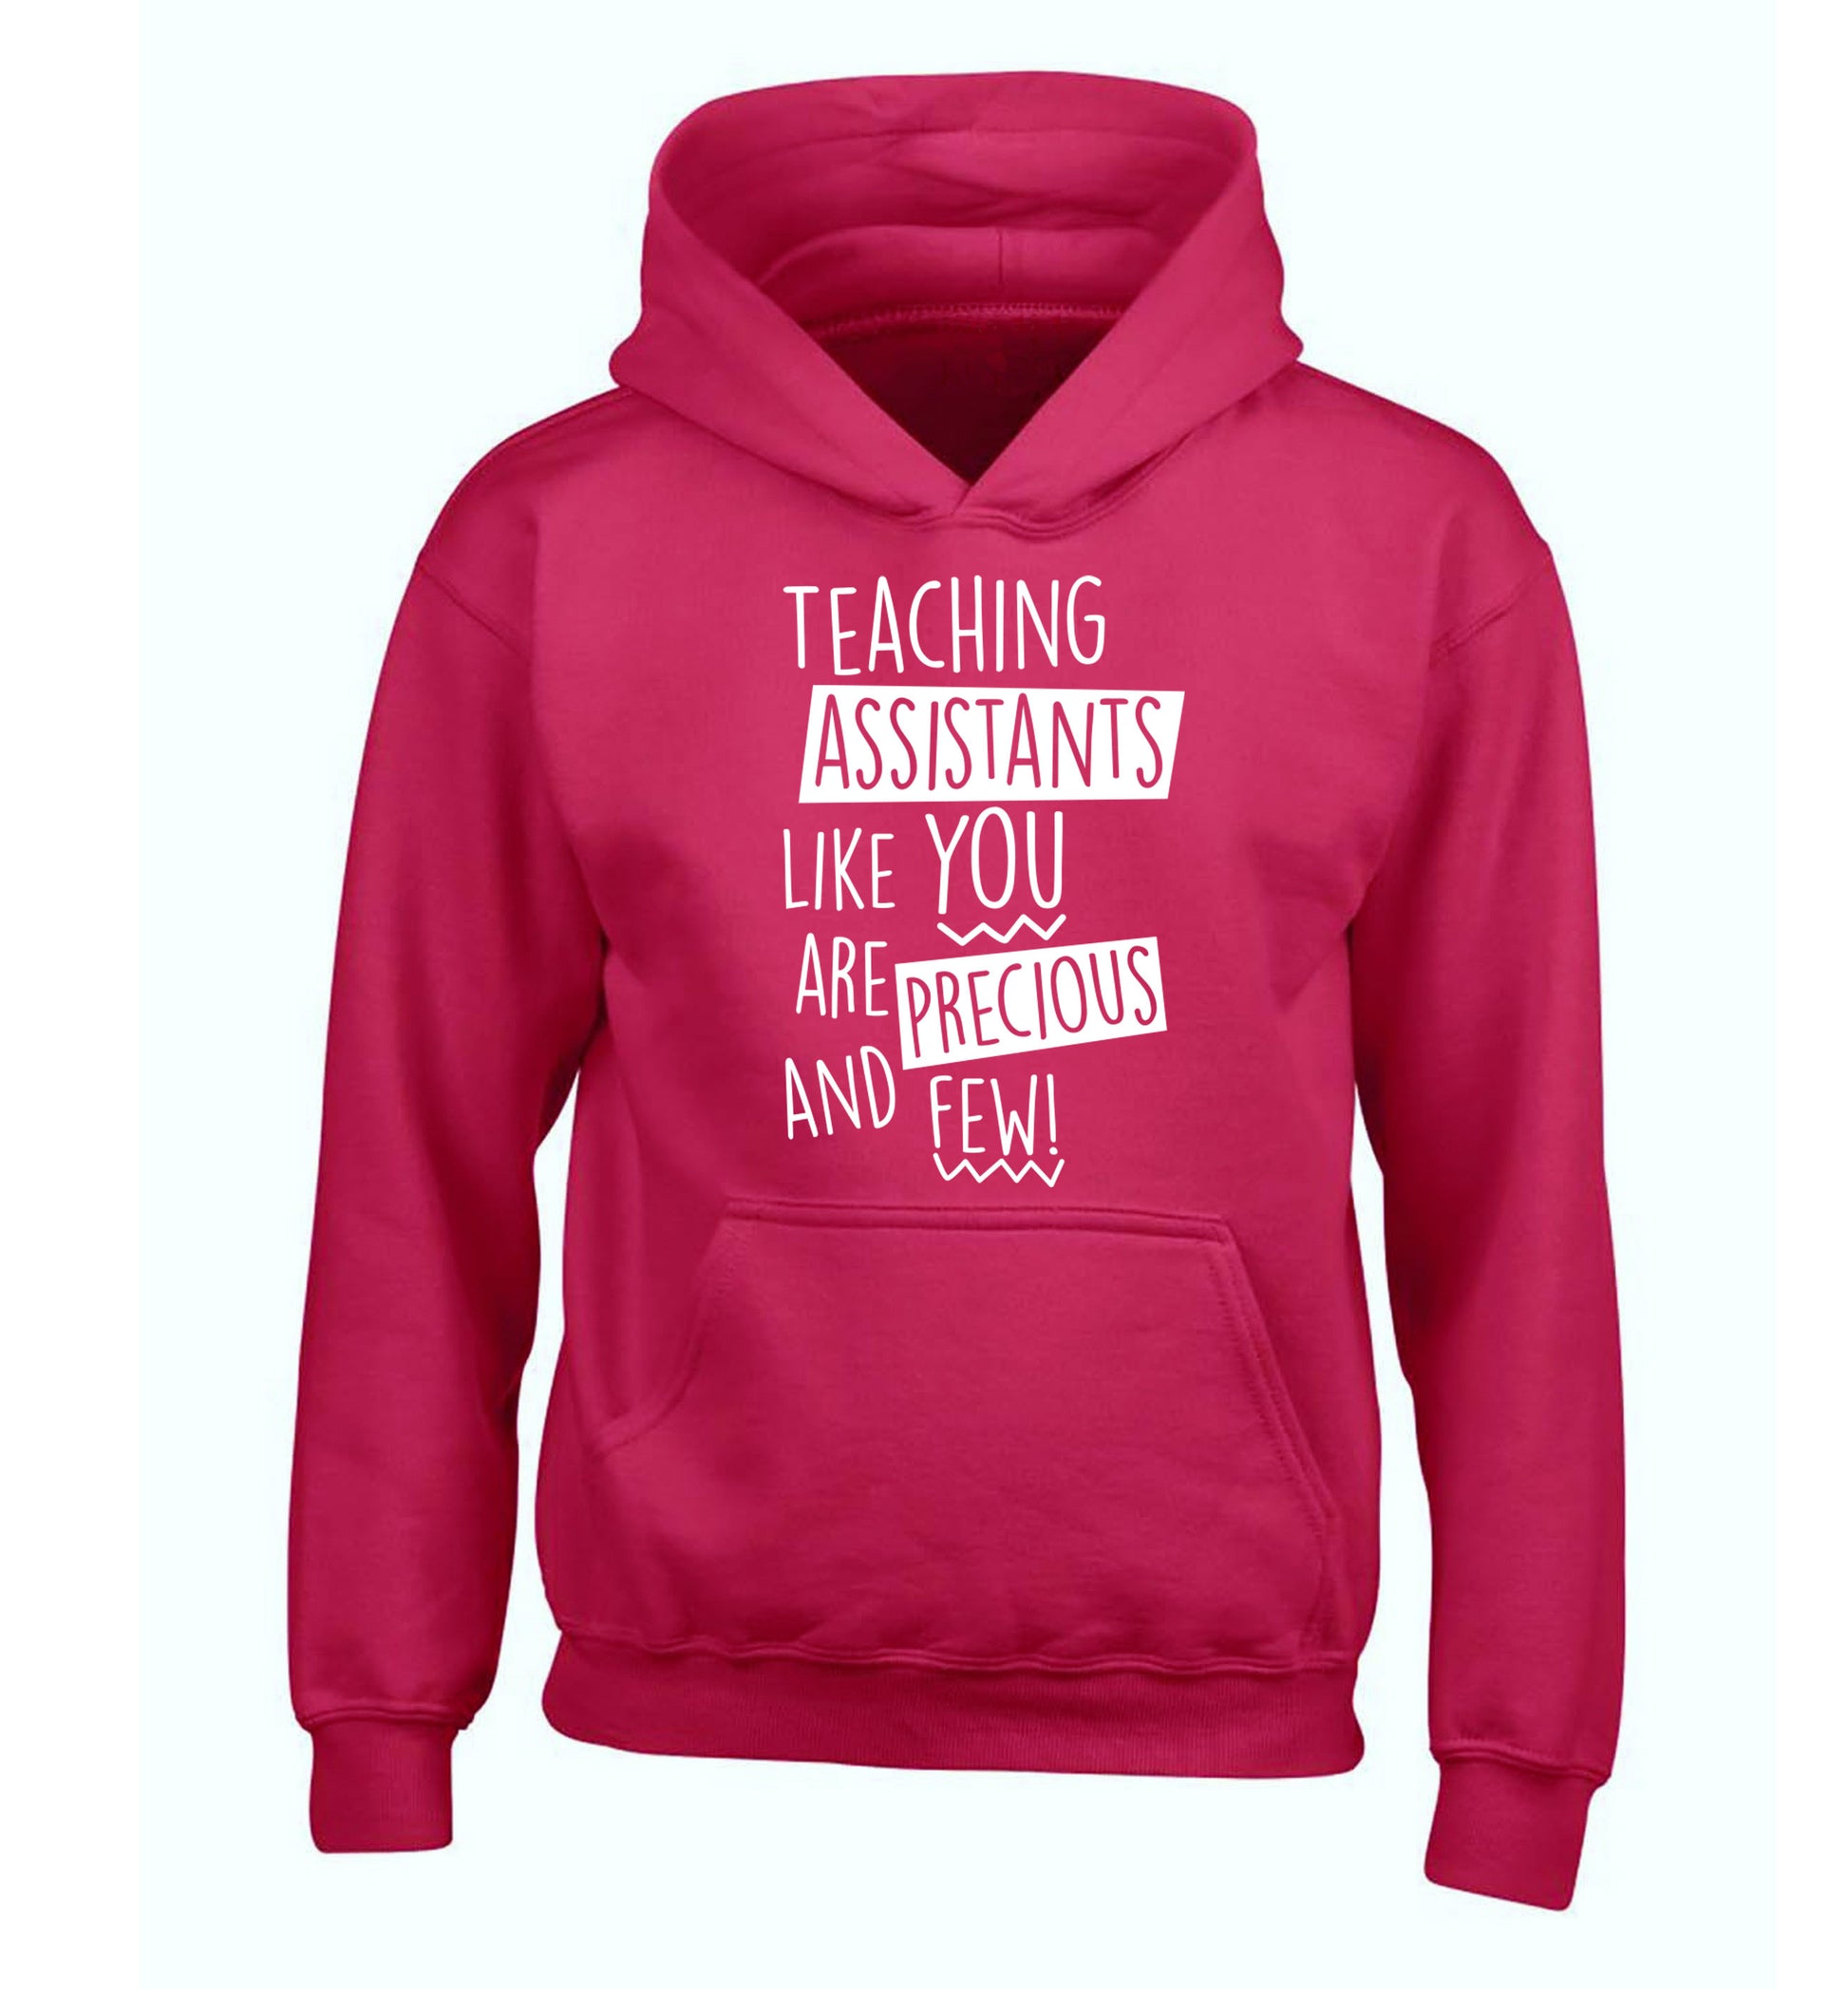 Teaching assistants like you are previous and few! children's pink hoodie 12-14 Years